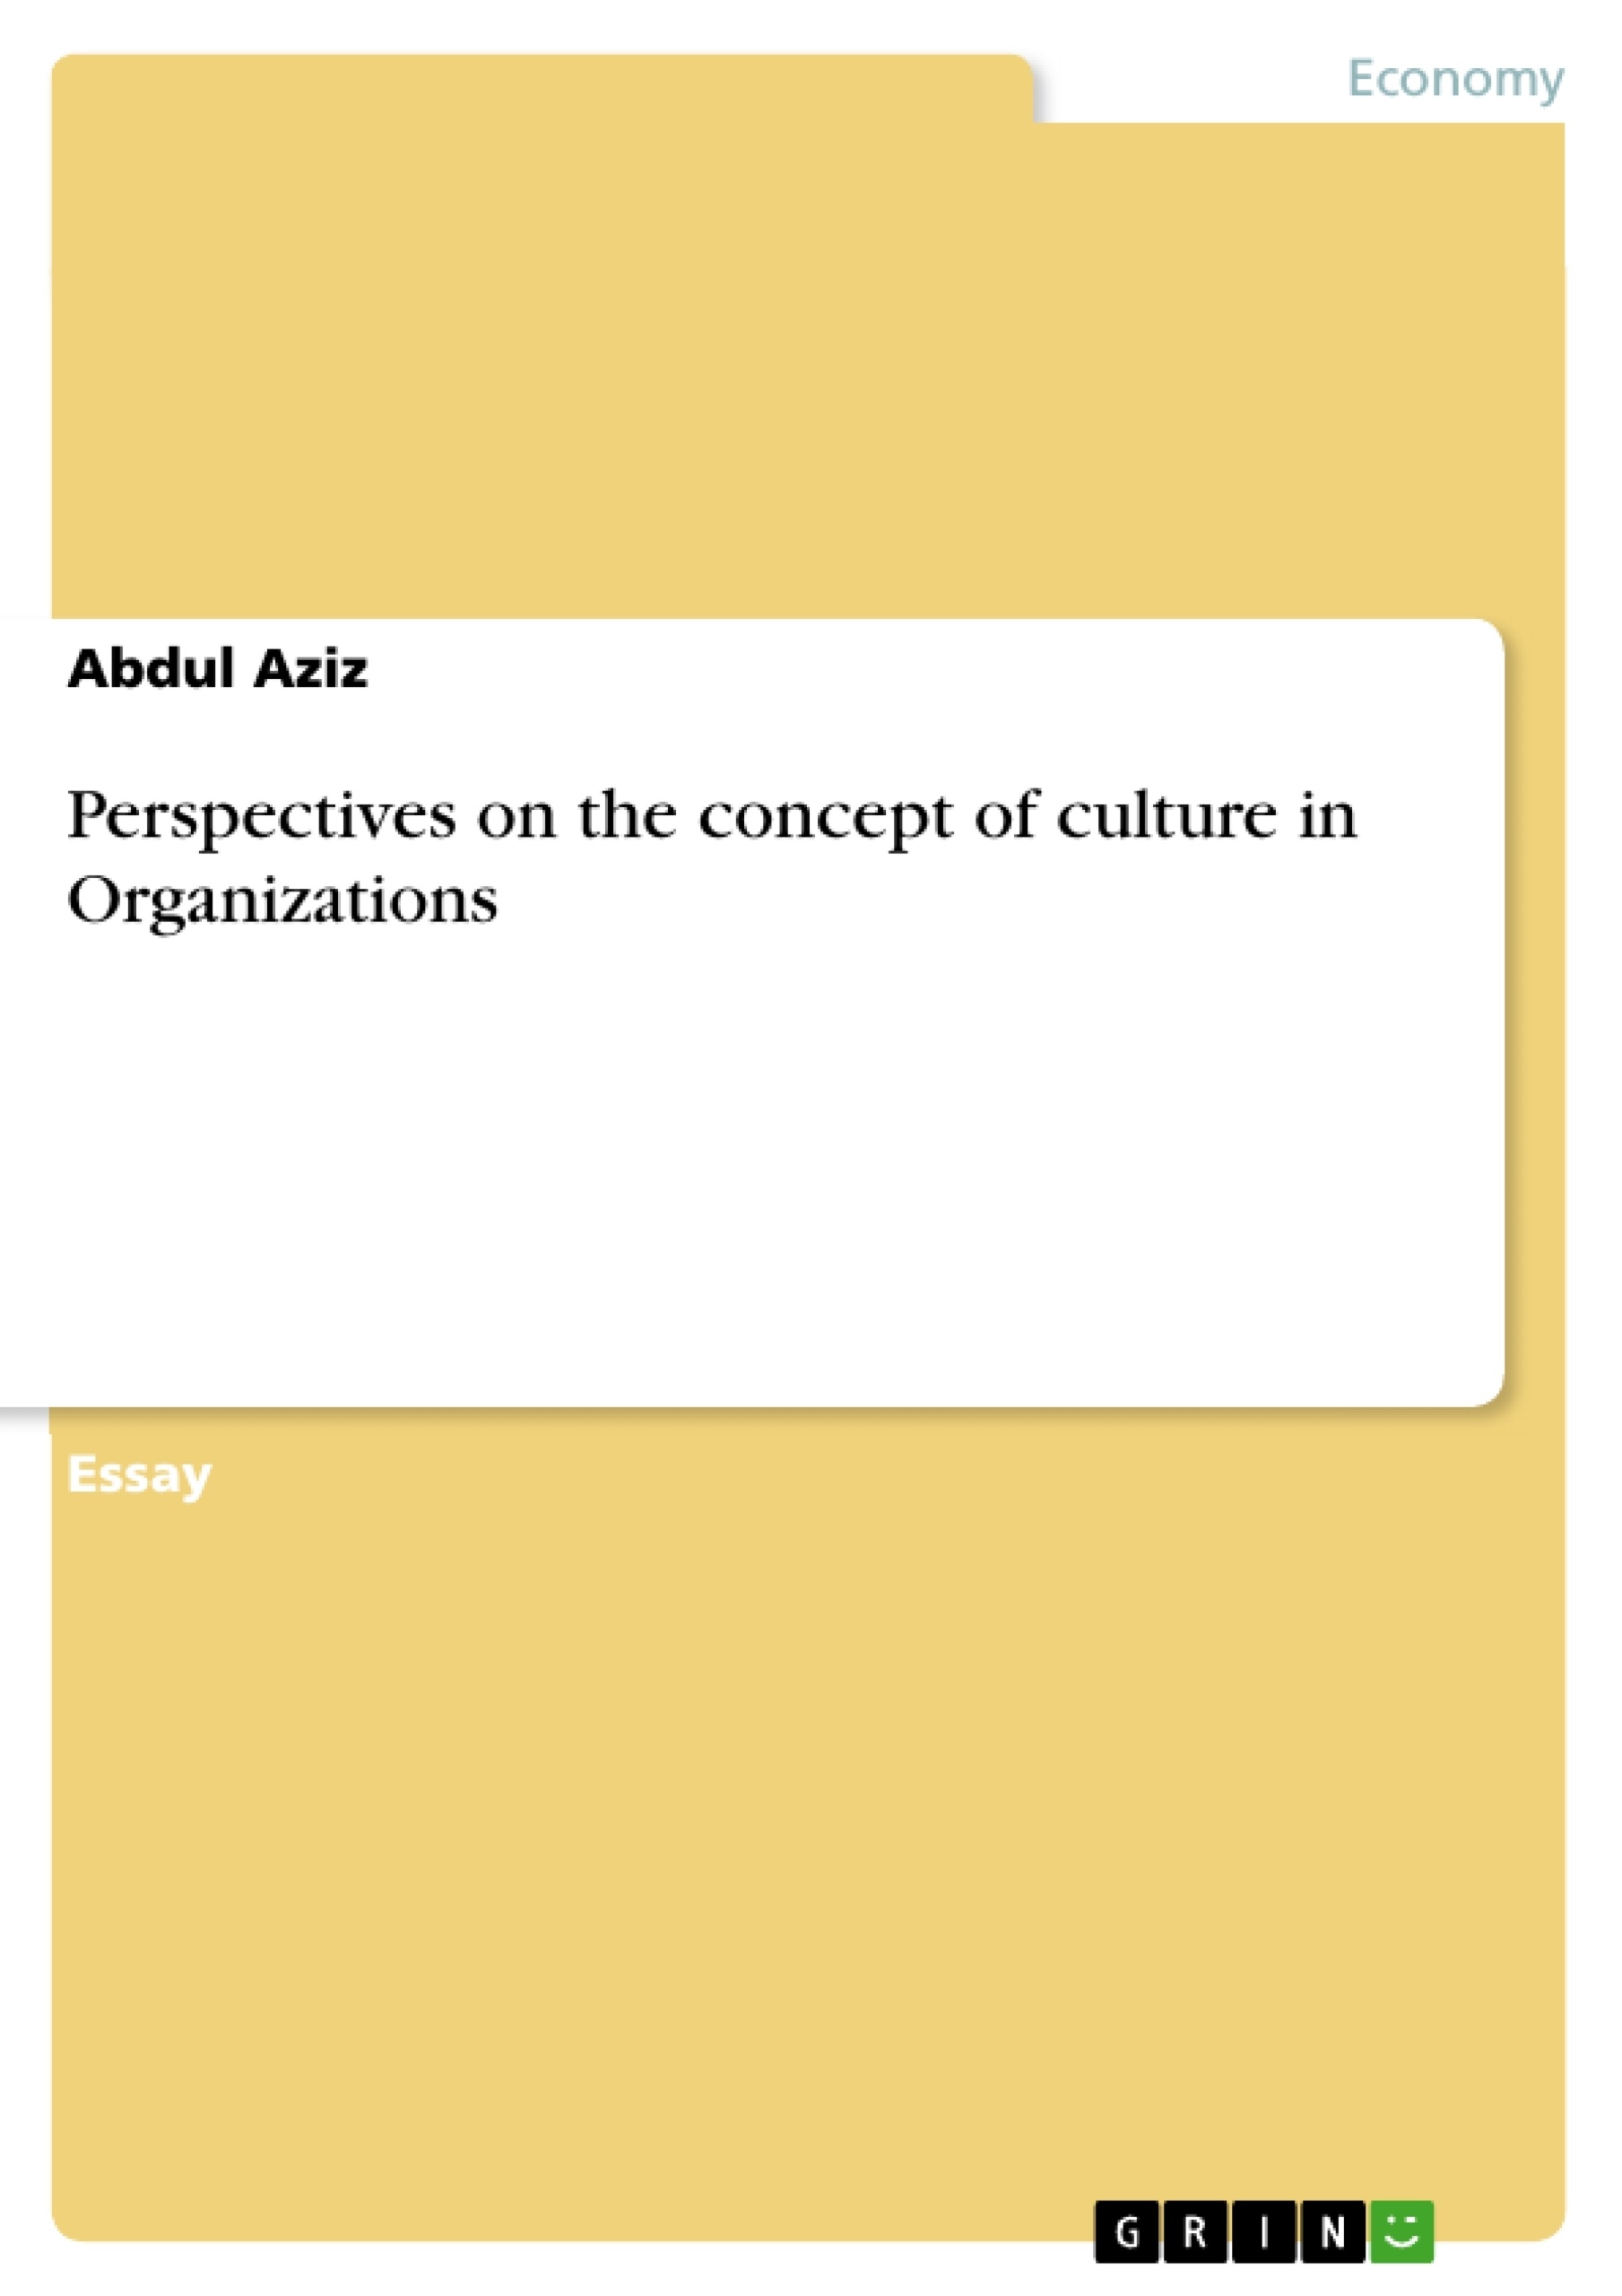 Title: Perspectives on the concept of culture in Organizations